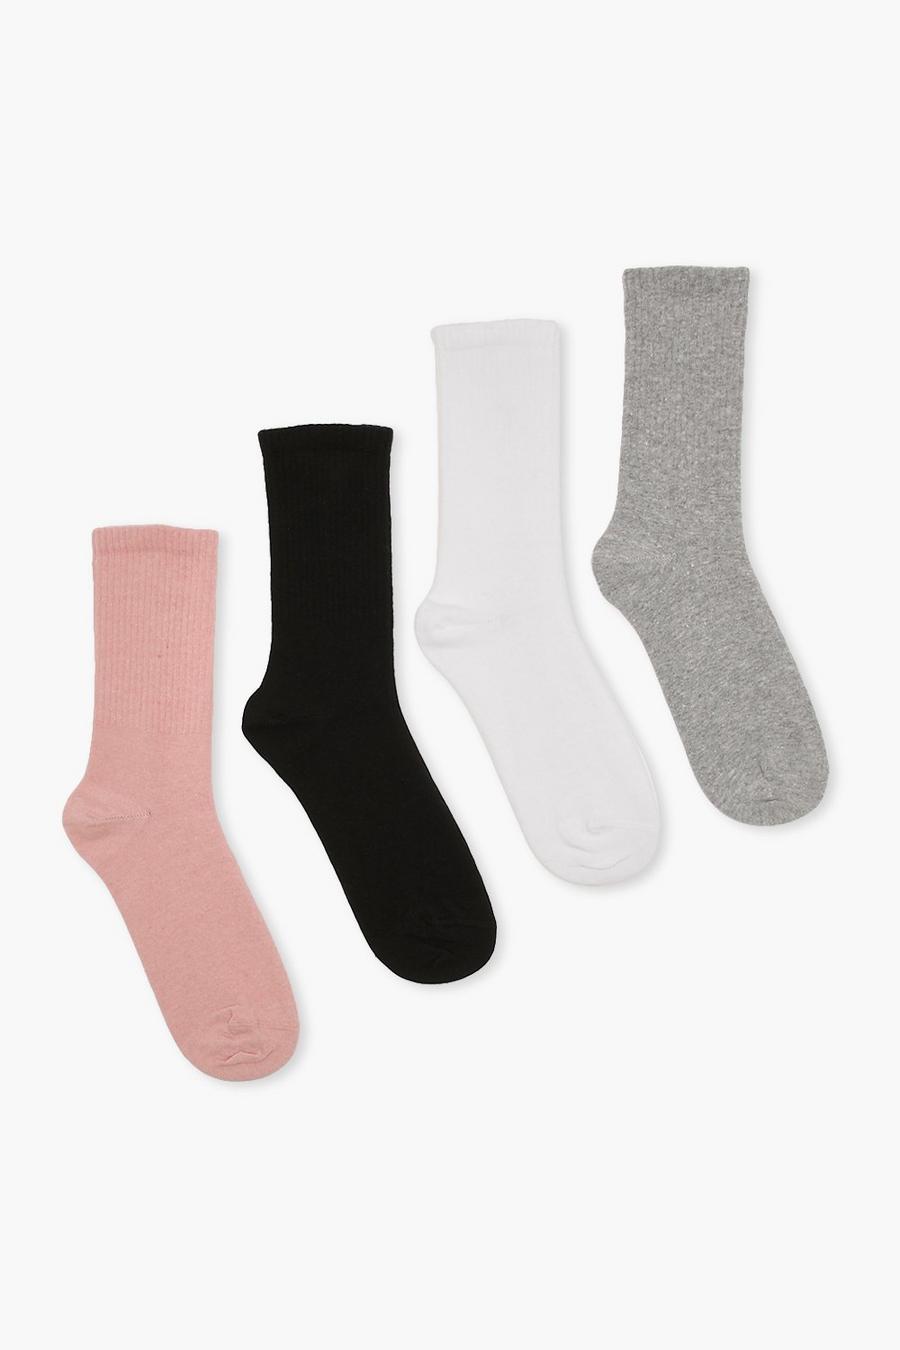 Multi Coloured Recycled Sports Socks 4 Pack